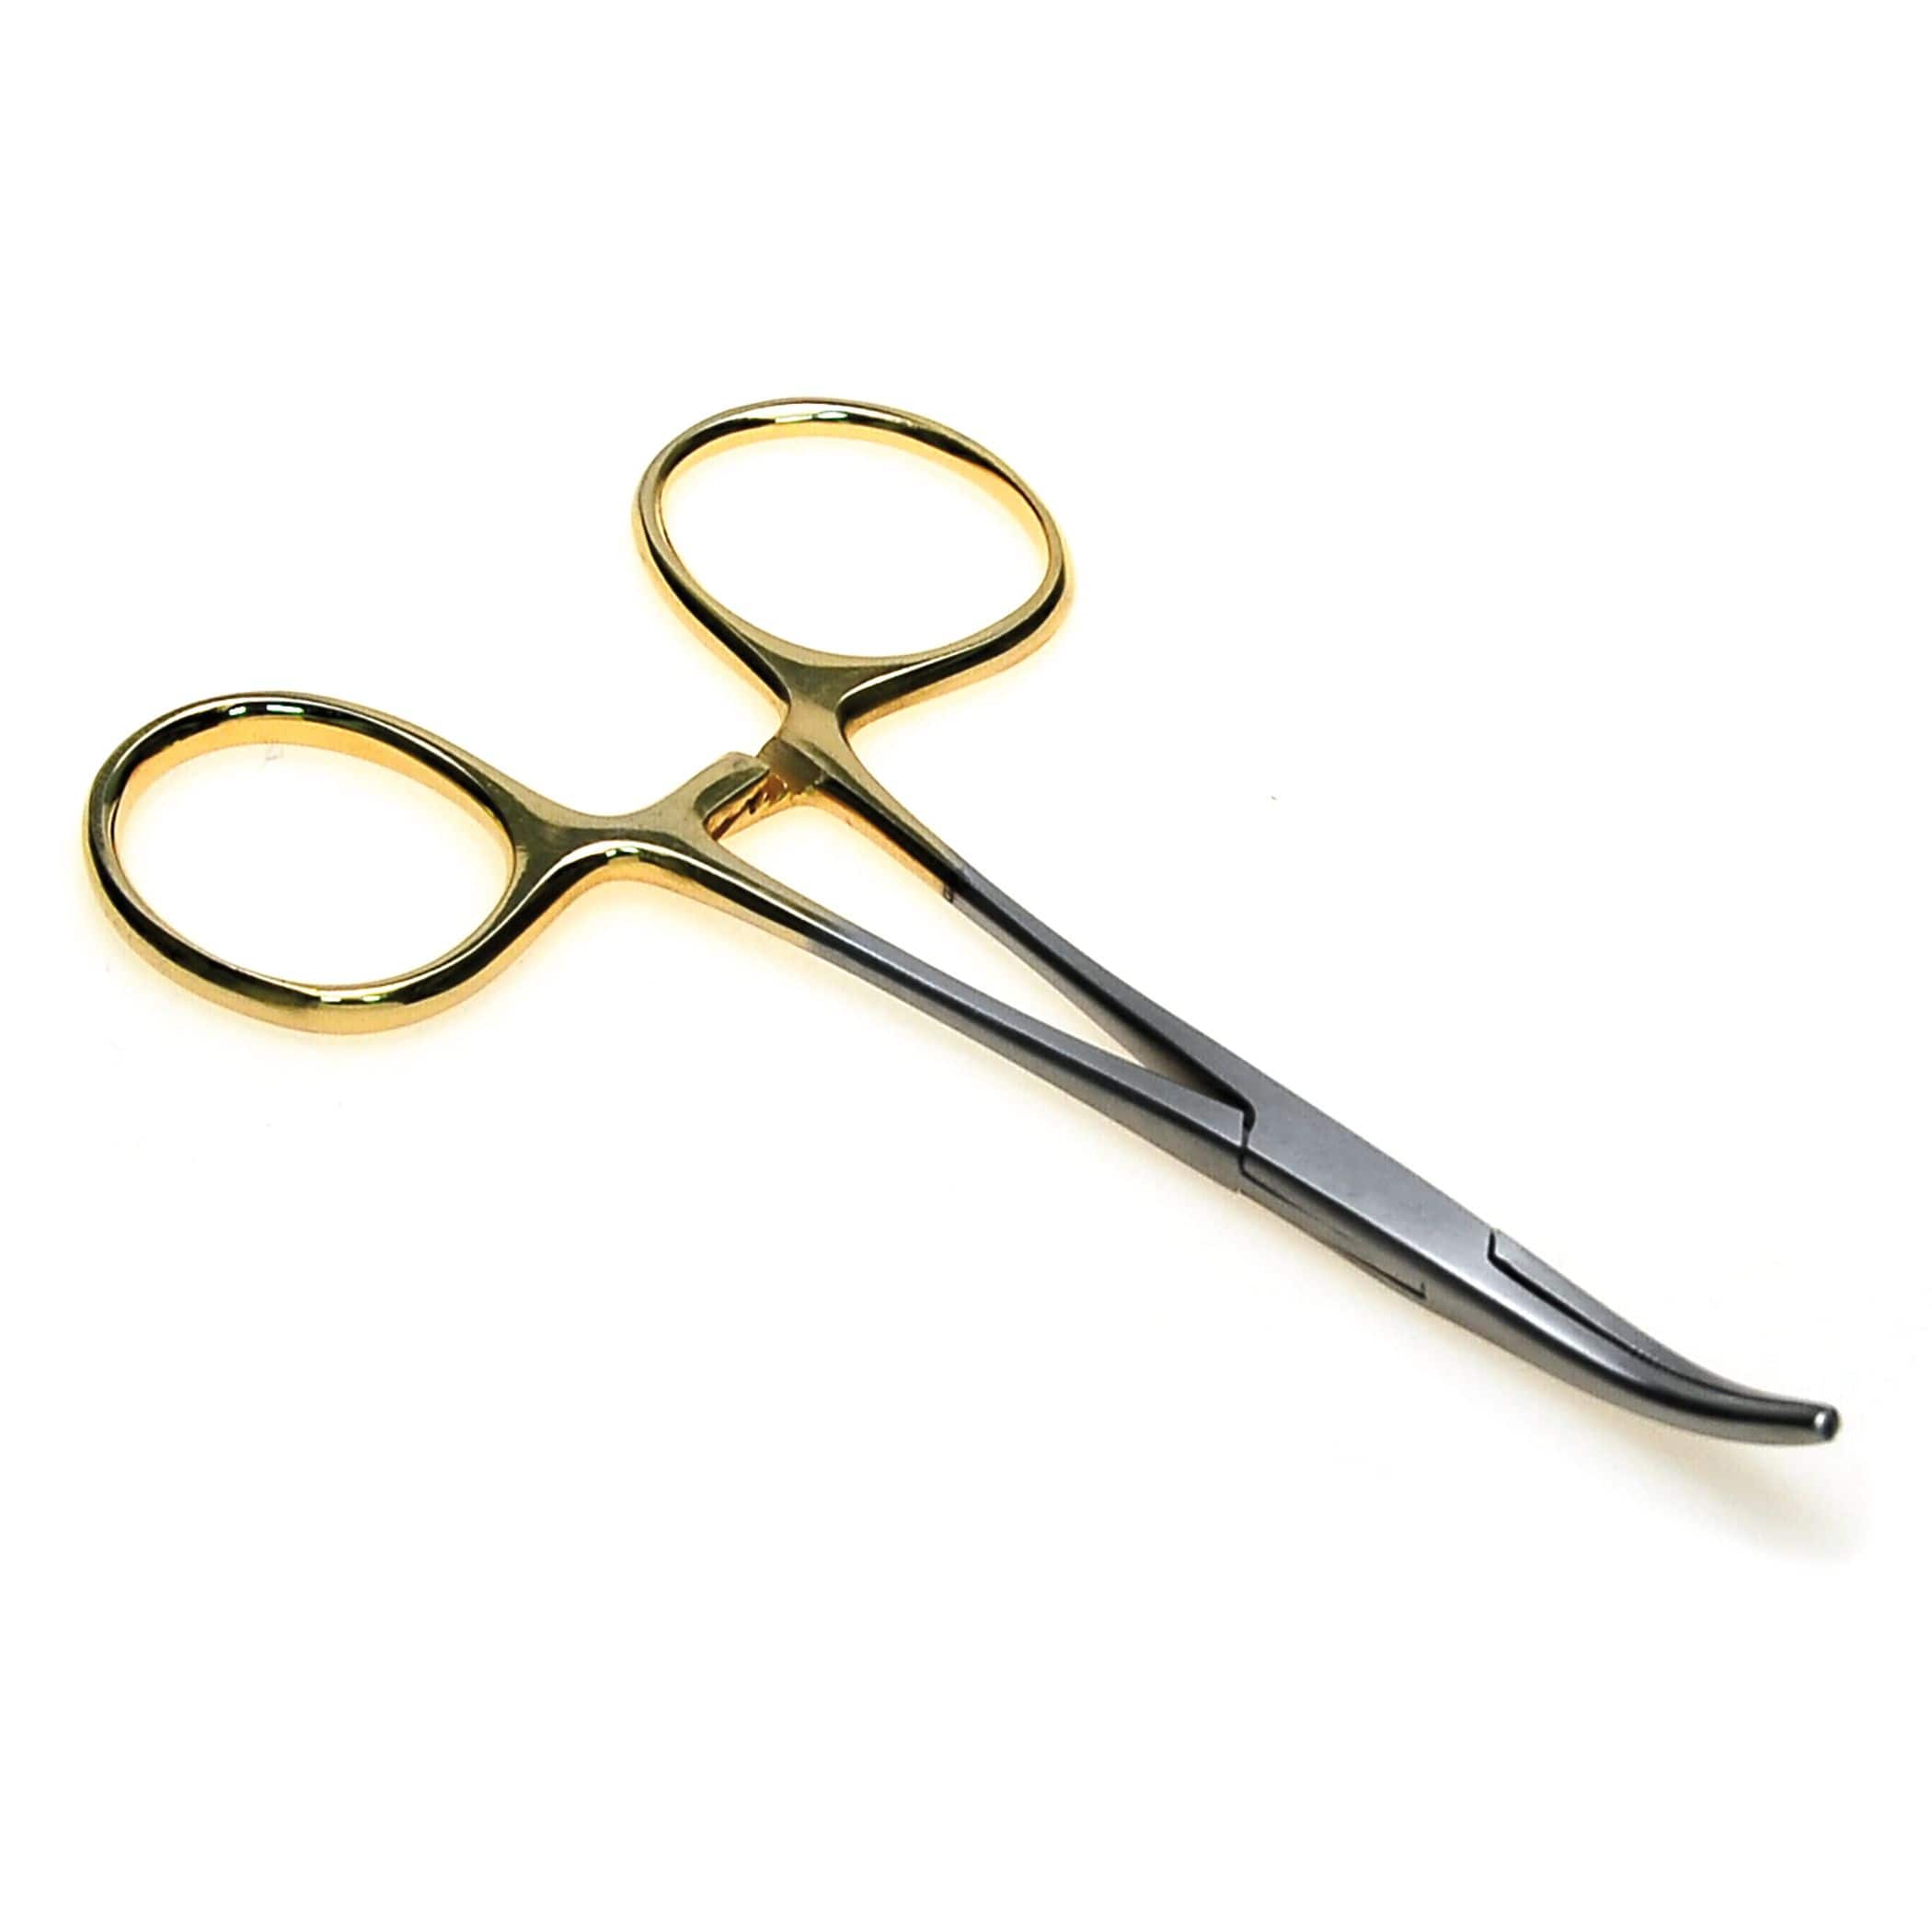 SuperFly Stainless Steel Curved Forceps, 6-in, Gold